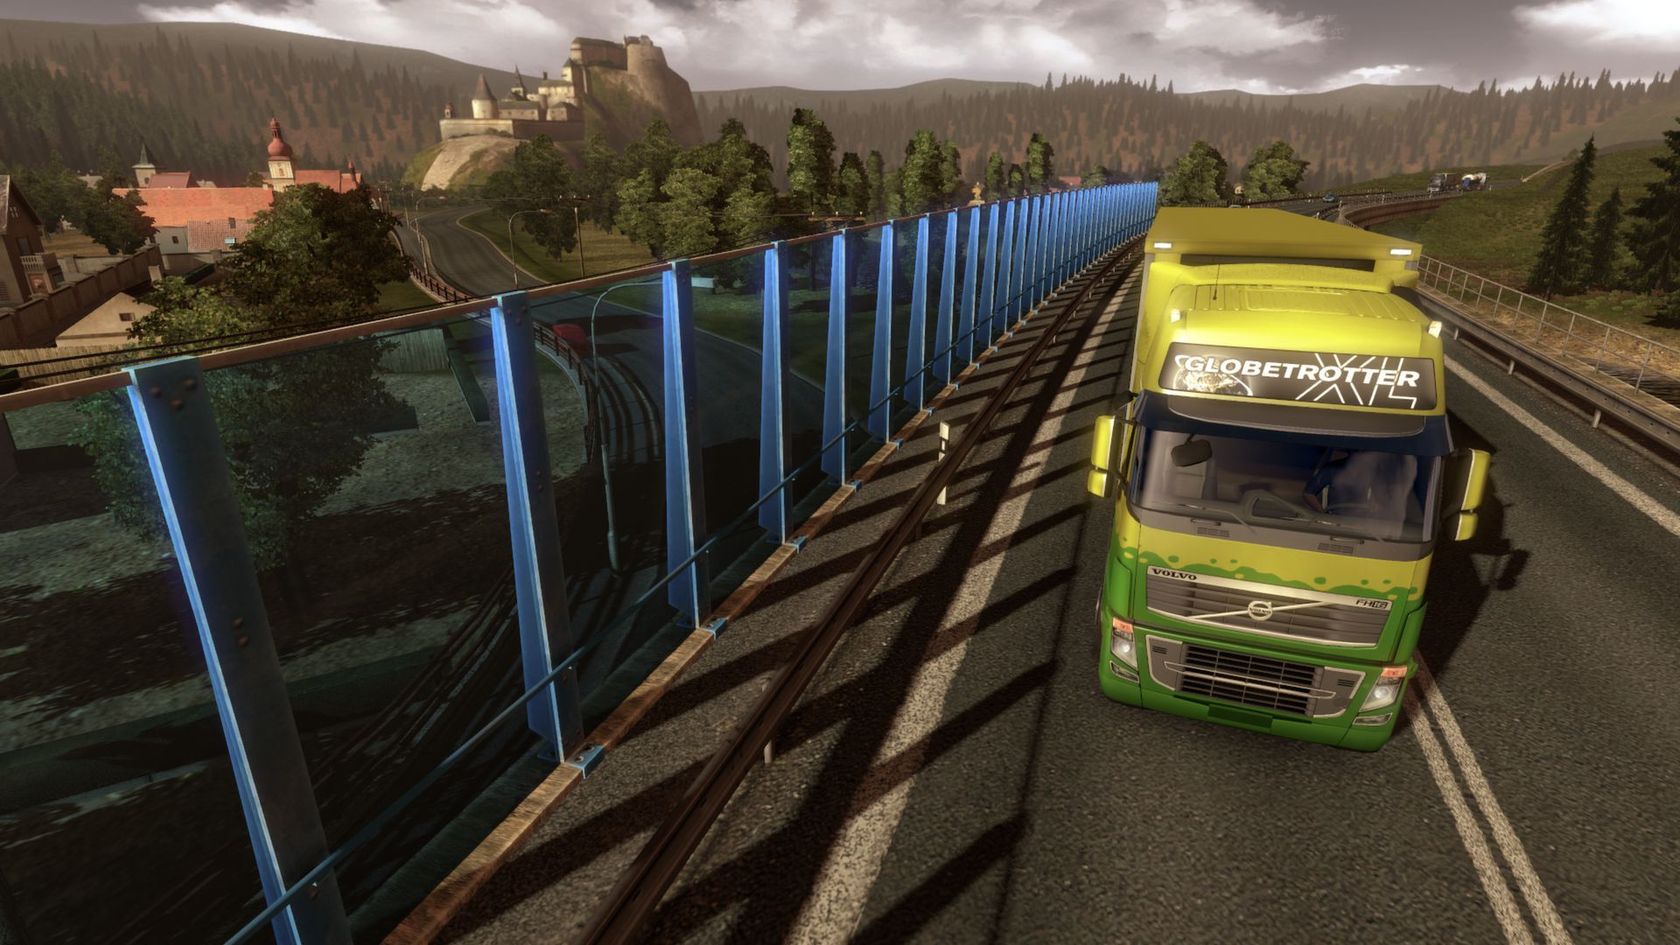 Euro Truck Simulator 2 - Going East! Steam Key for PC, Mac and